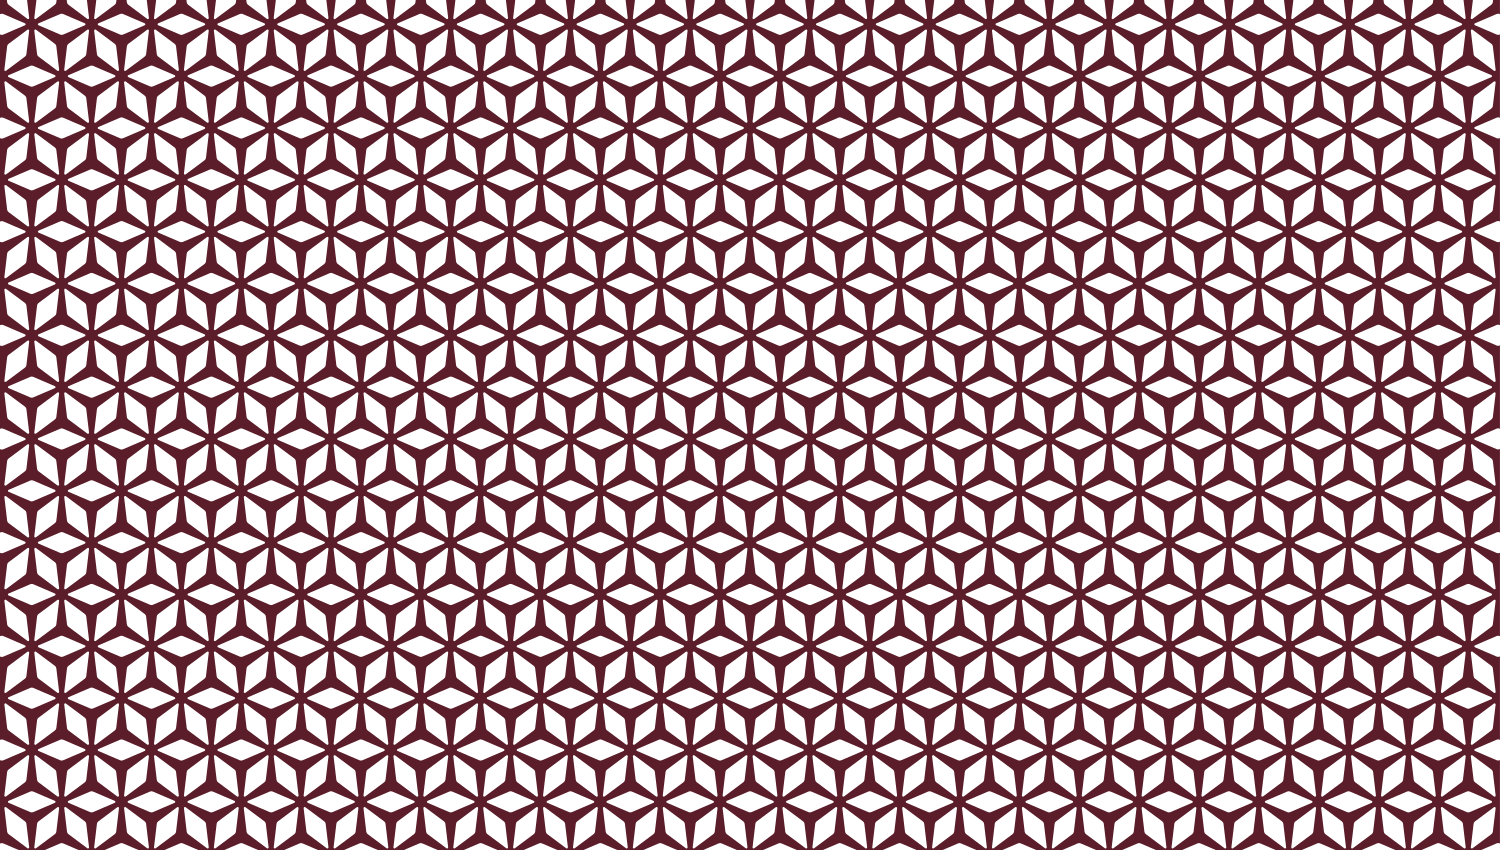 Parasoleil™ Tesseract© pattern displayed with a burgundy color overlay